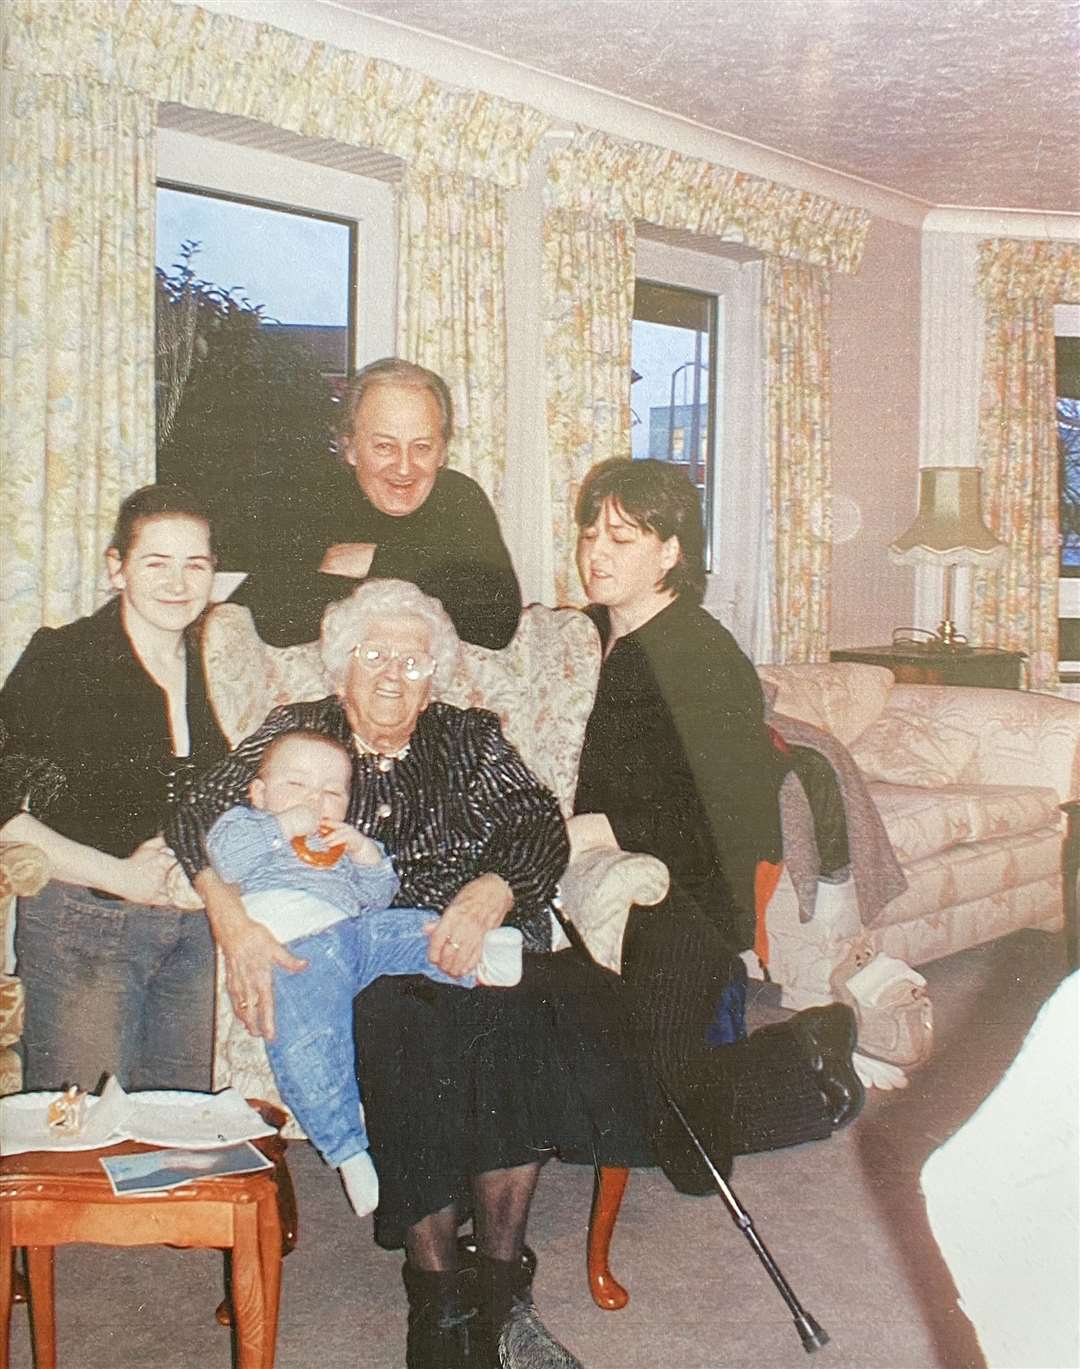 John (middle) with his mum Lily Violet, grandaughter Kelly, daughter Alison and great grandson - taken in 2002